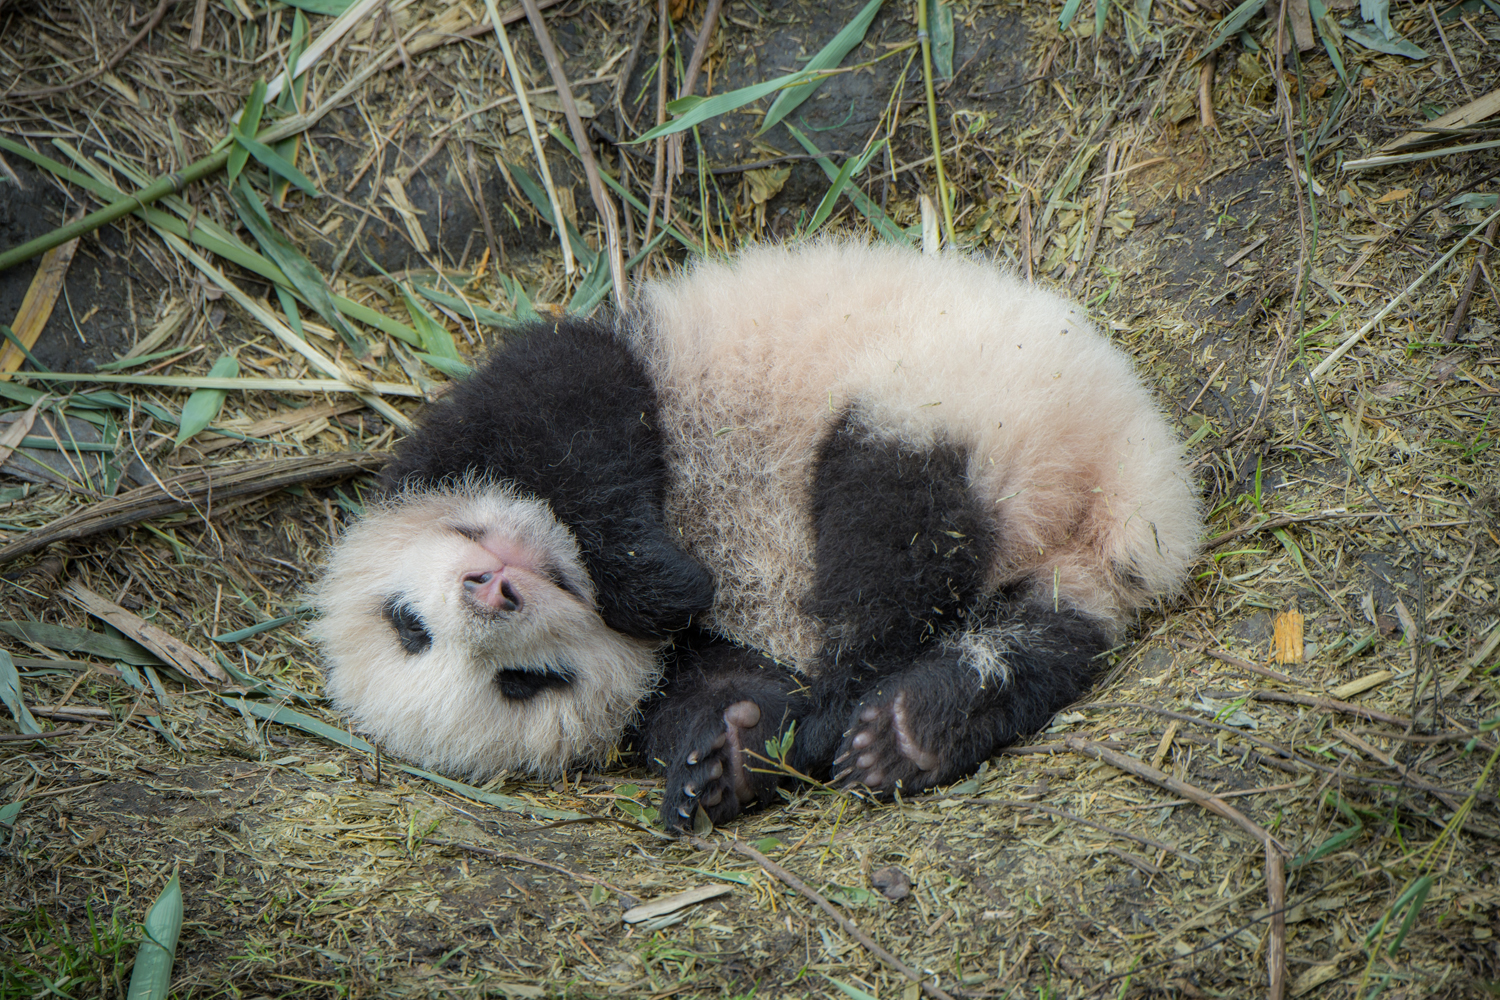 A one month old baby panda. The mother is a captiveborn panda and her baby is being trained to be released back into thewild at the Wolong Nature Reserve managed by the China Conservationand Research Center for the Giant Panda.